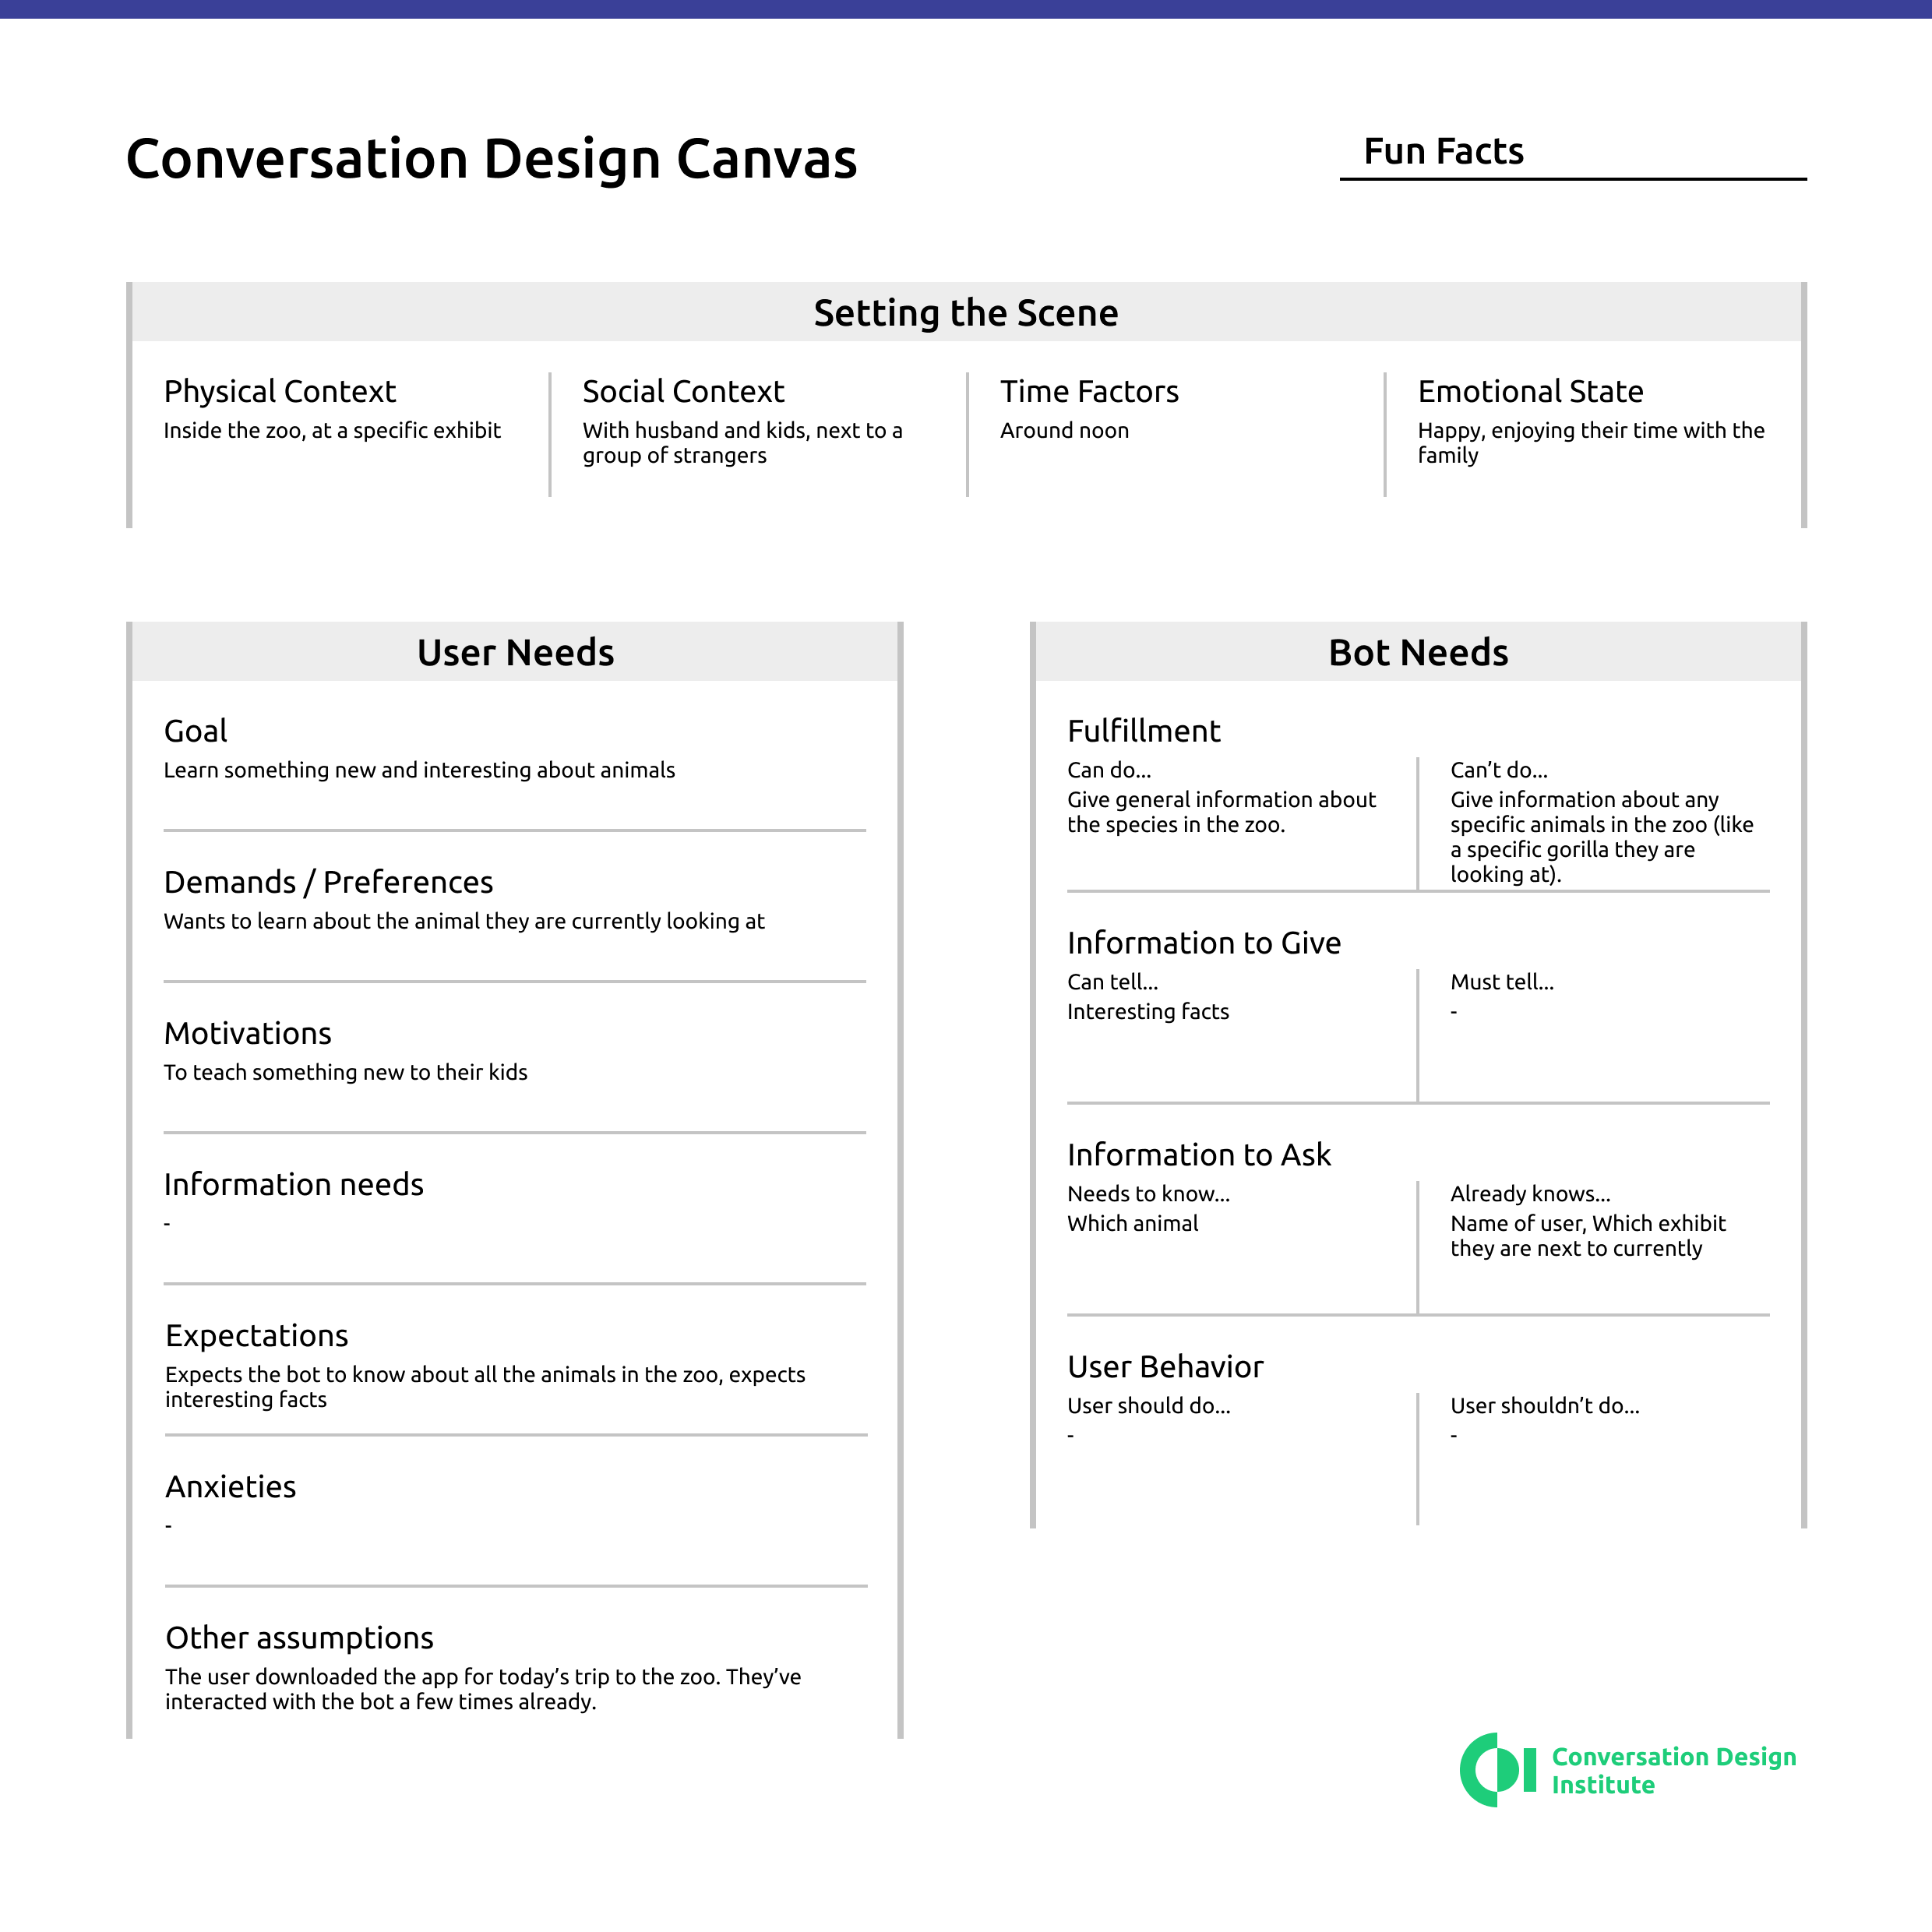 Completed Design Canvas for Fun Facts